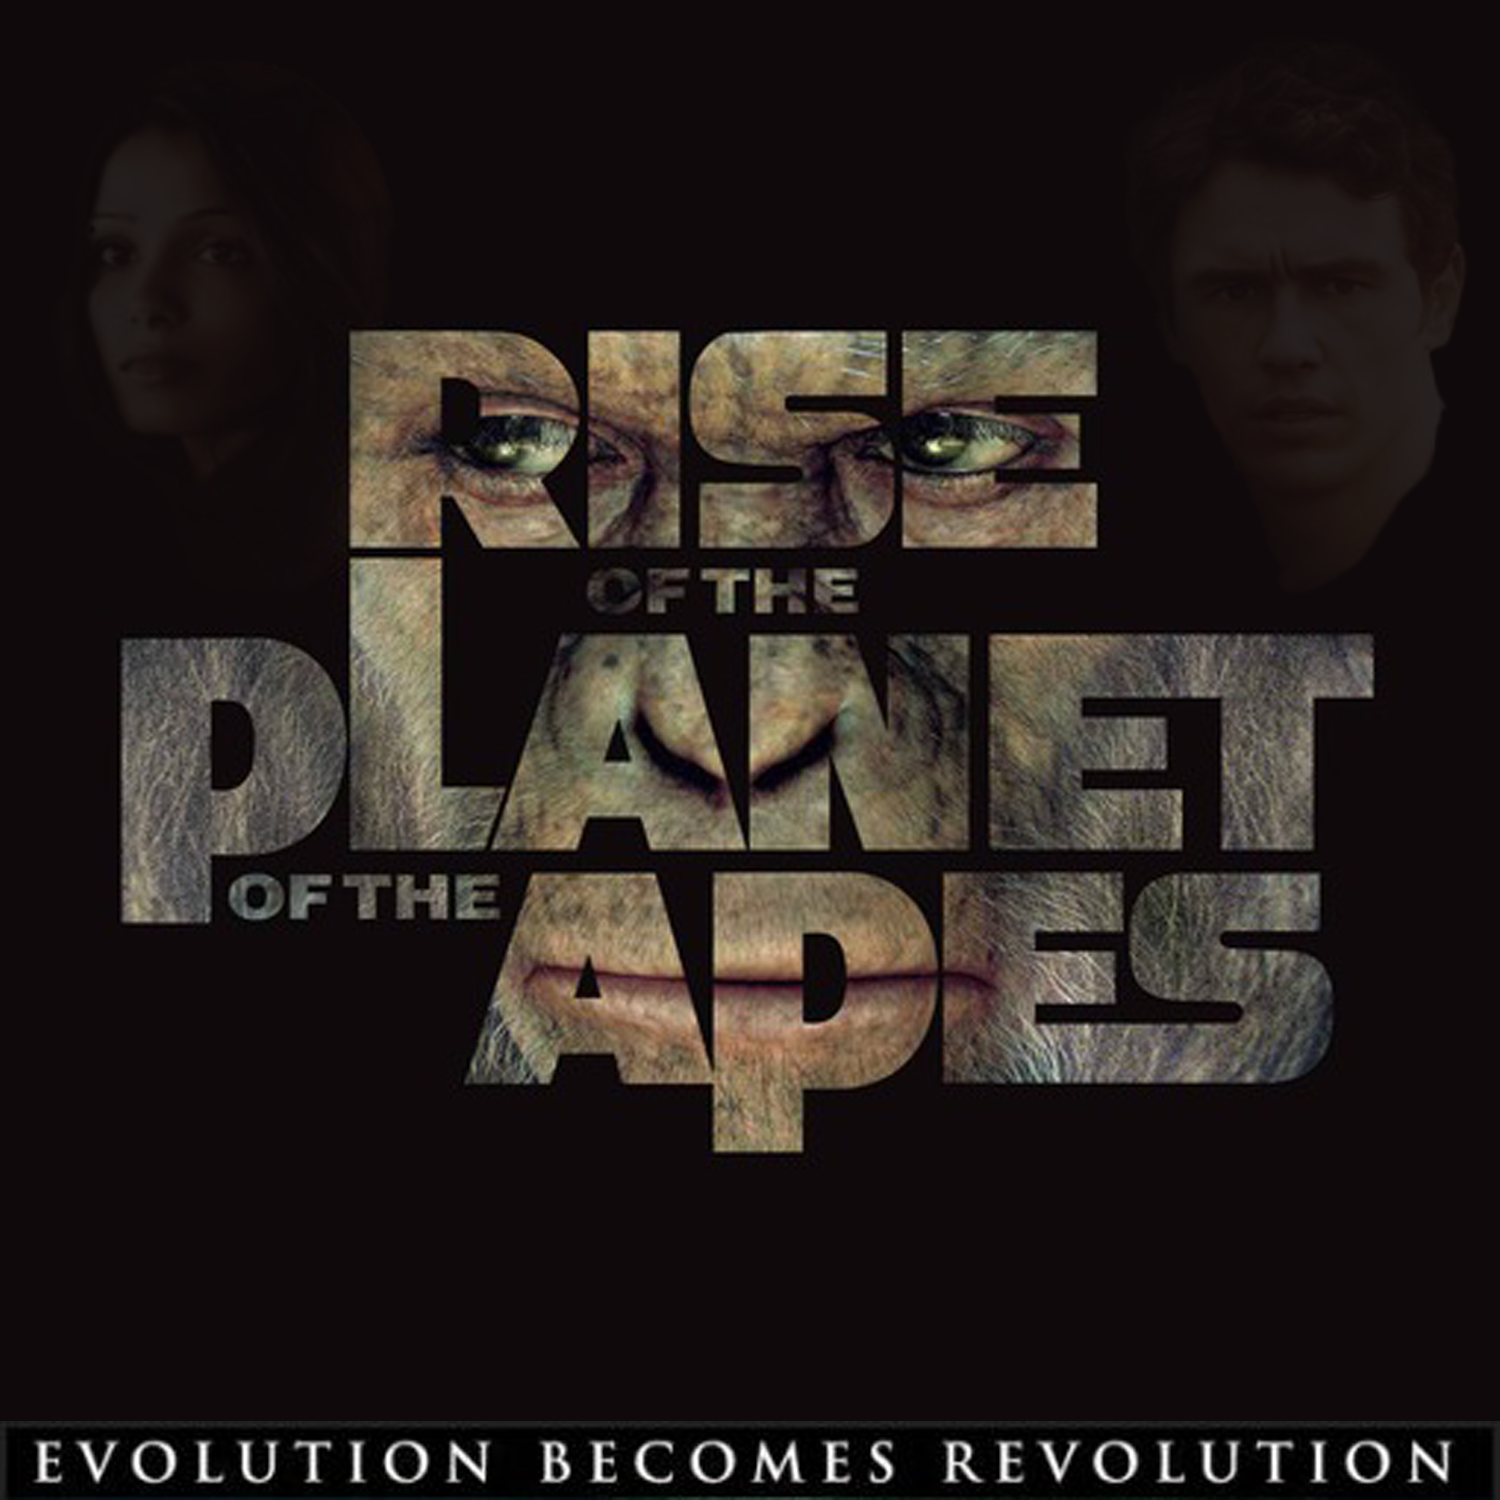 Rise of the Planet of the Apes (2011)